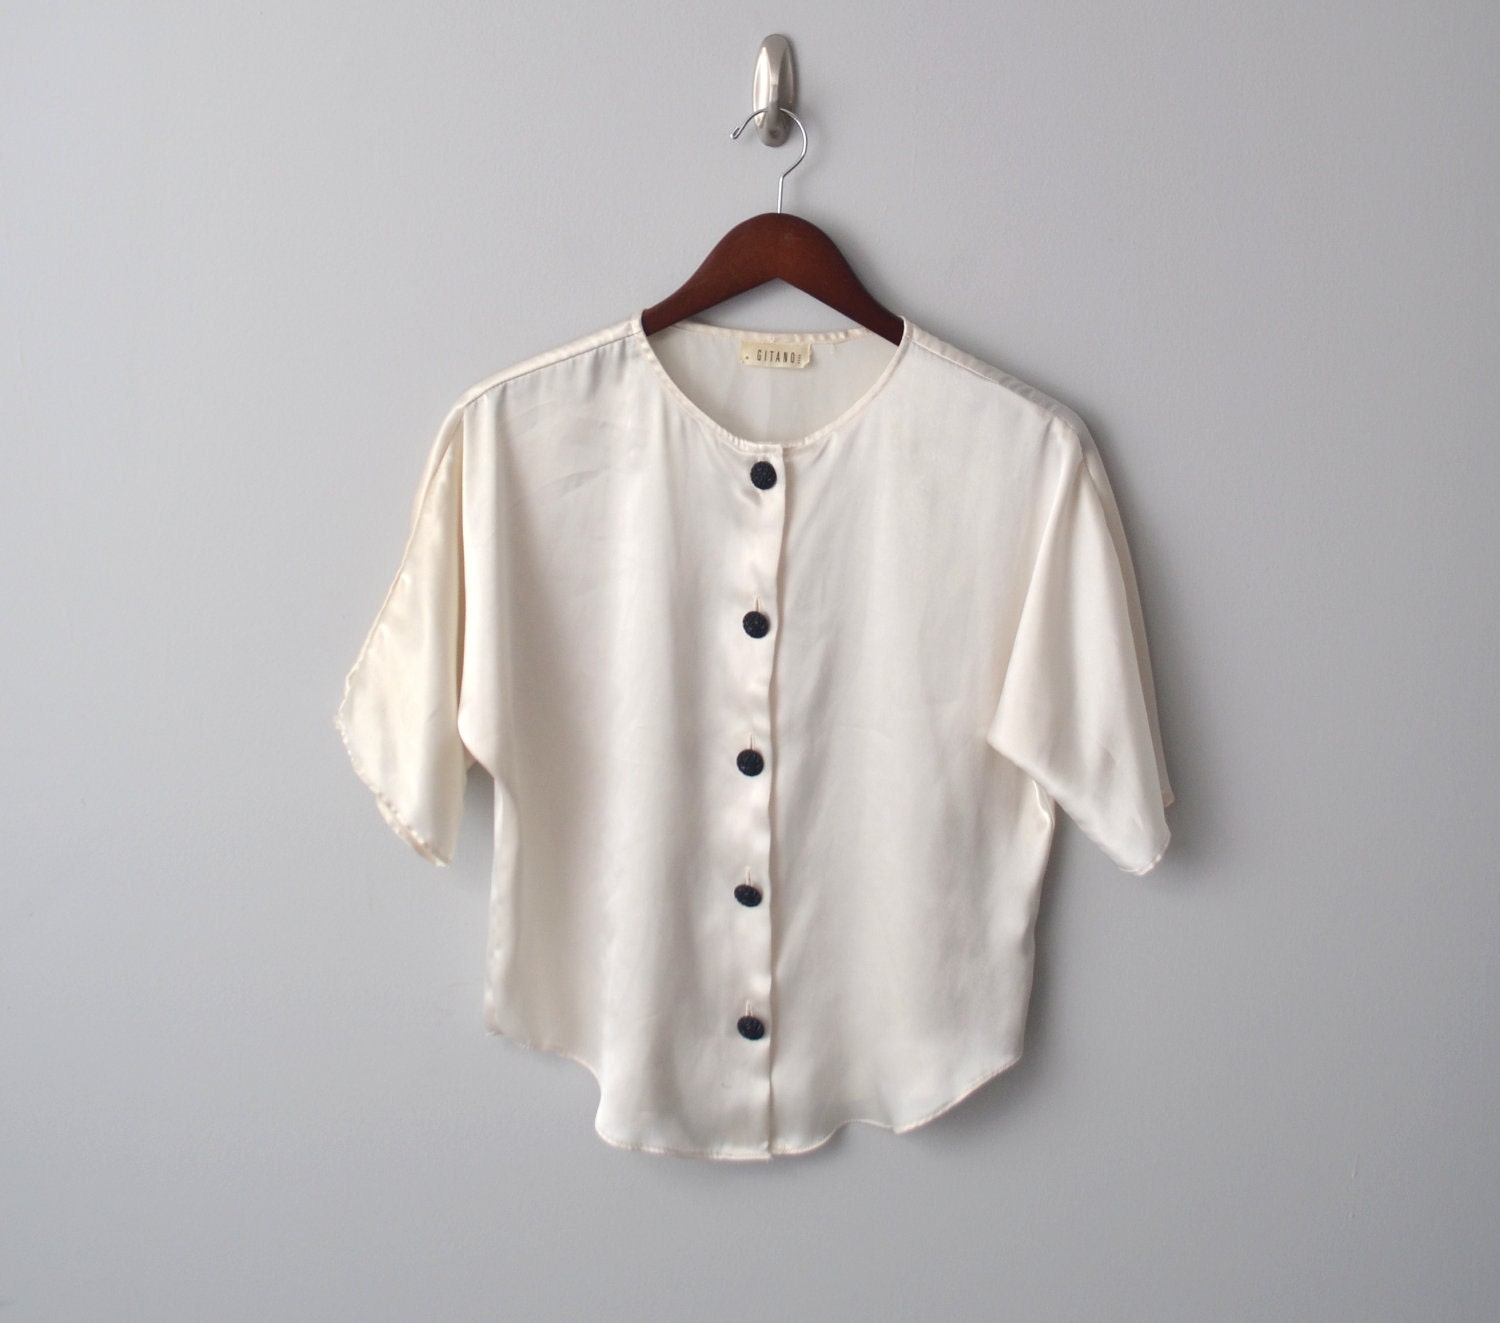 Vintage Cream colored buttoned down shirt size aprox medium